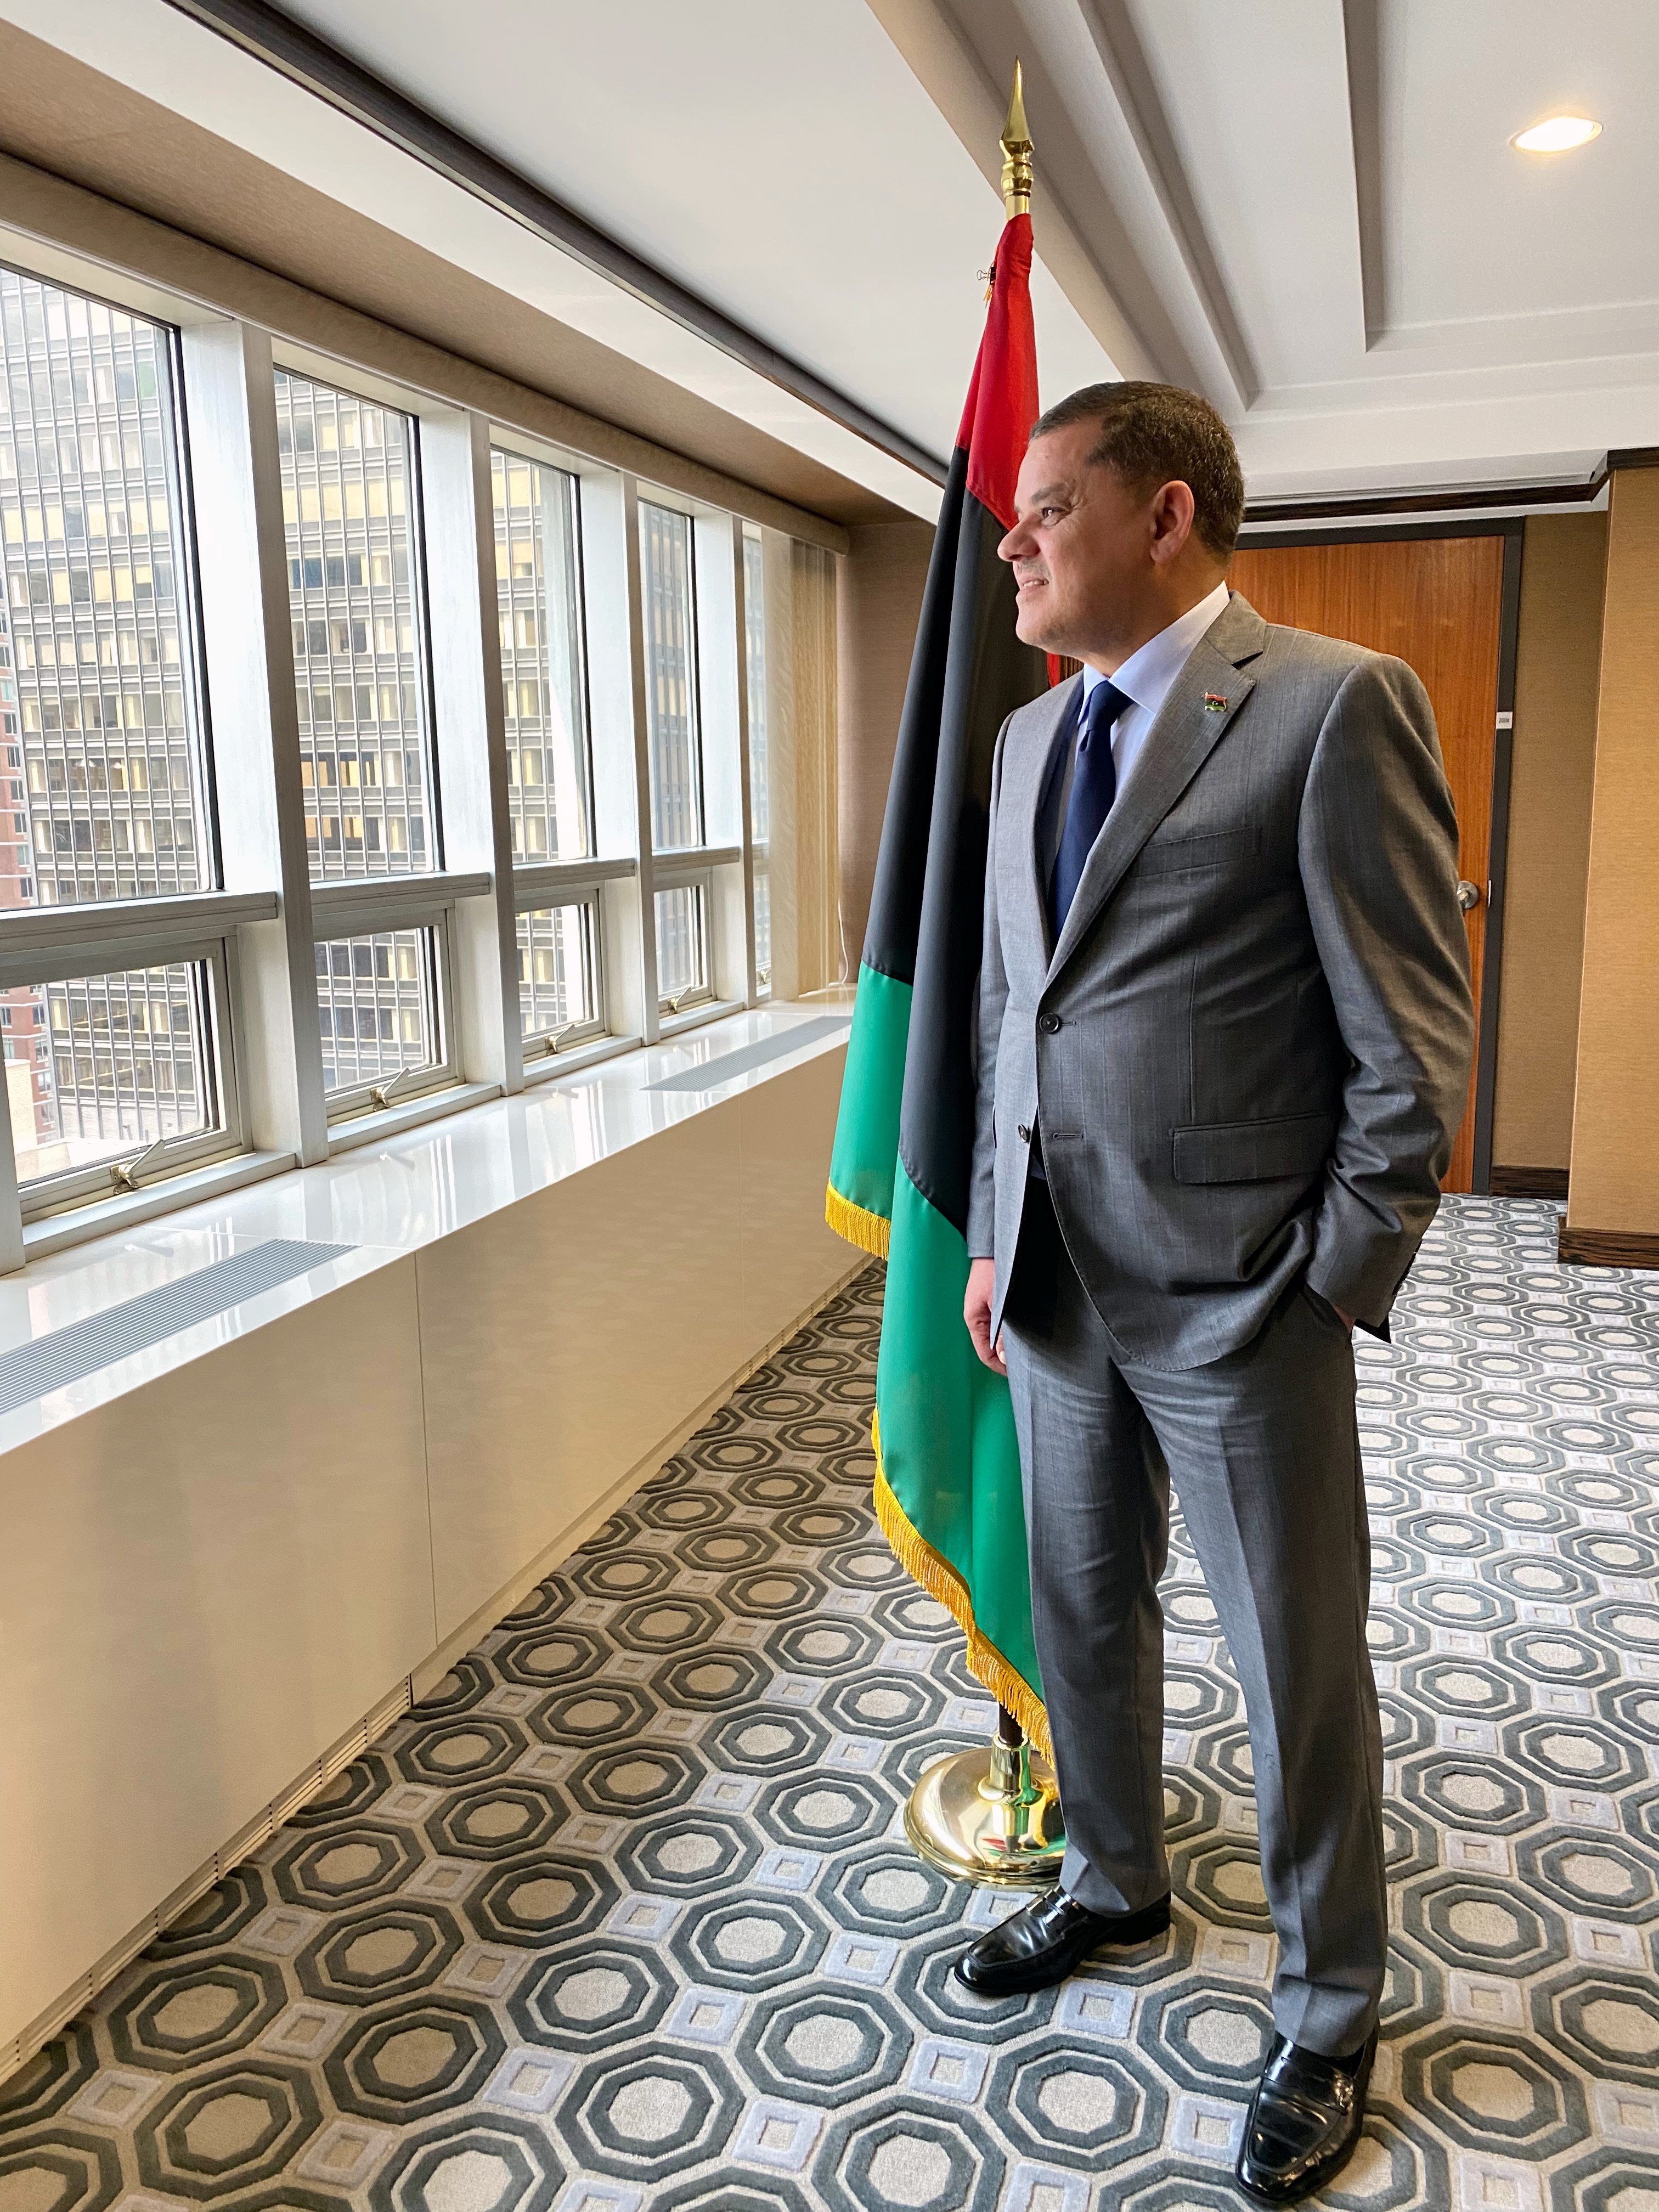 Libya's unity government Prime Minister Abdulhamid Dbeibah looks on at Libya's mission to the United Nations in New York